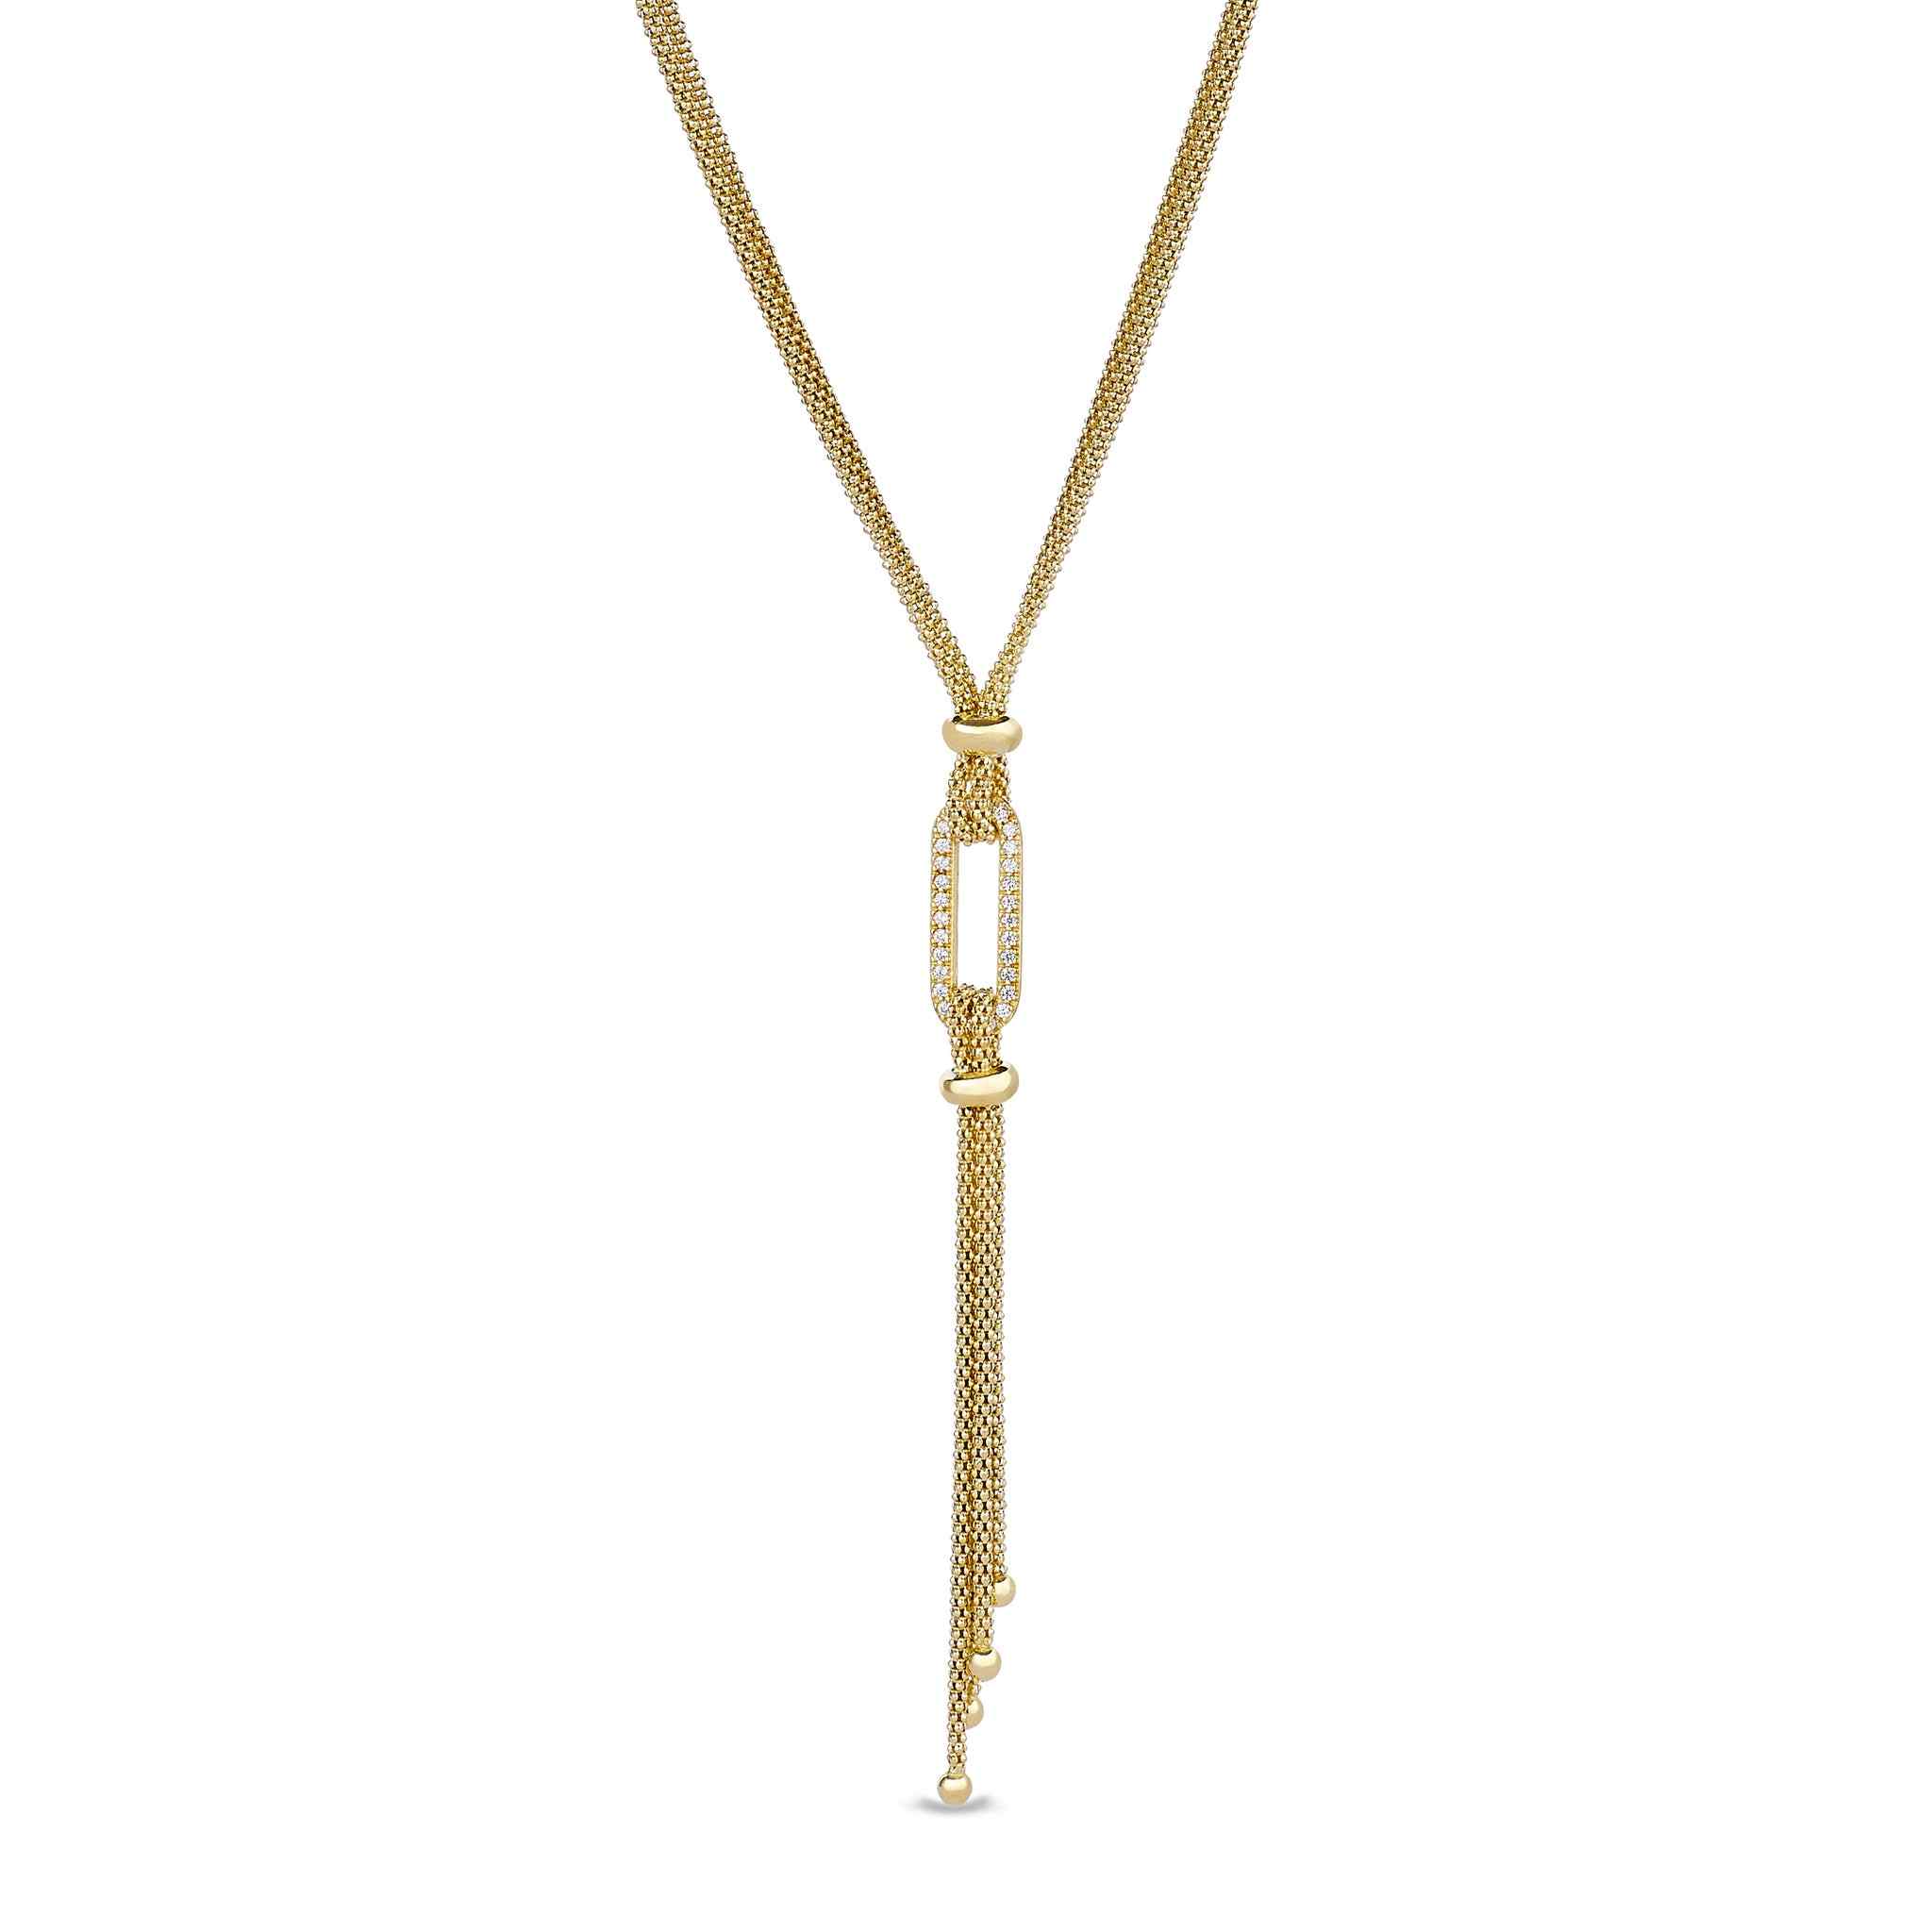 by Adina Eden 14k Gold-Plated Double Ball Paperclip Chain 18